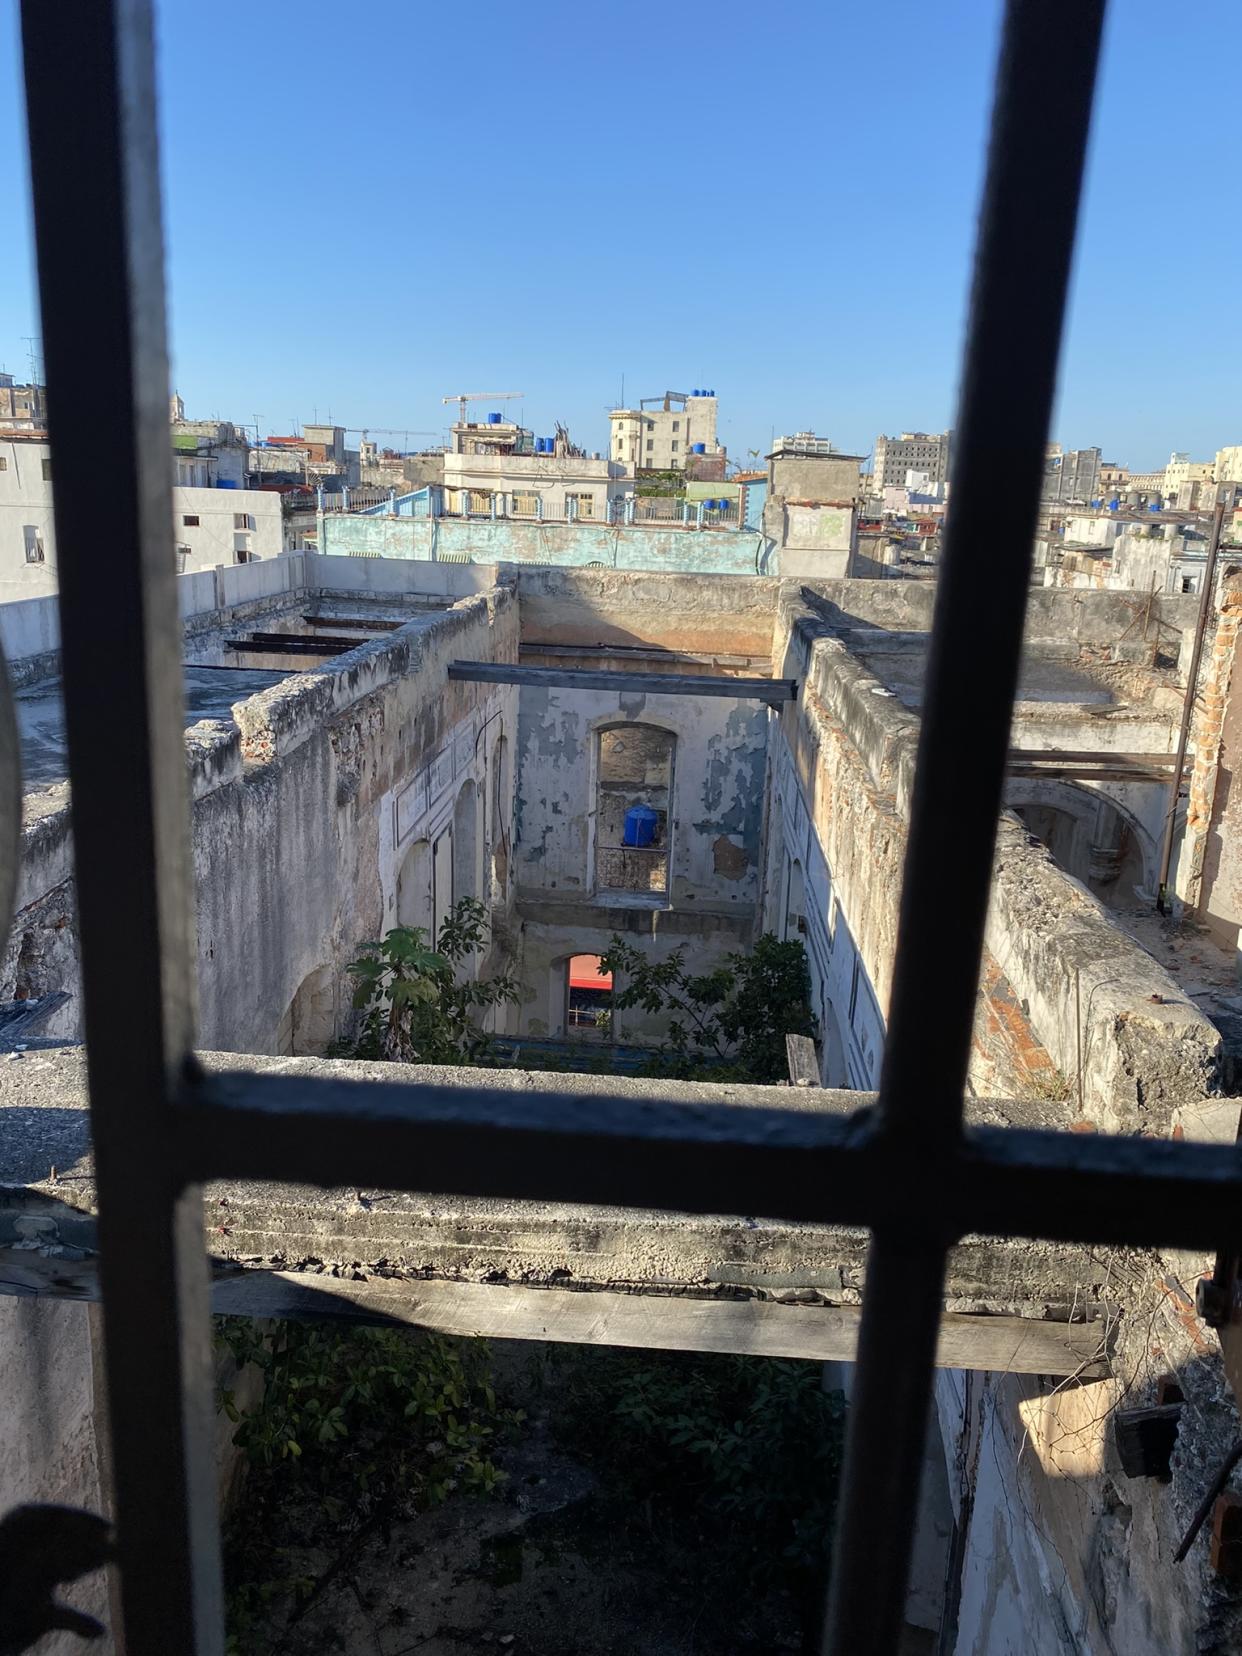 The view out the window of the Lizt studio in Havana. Photo: Rick Newman